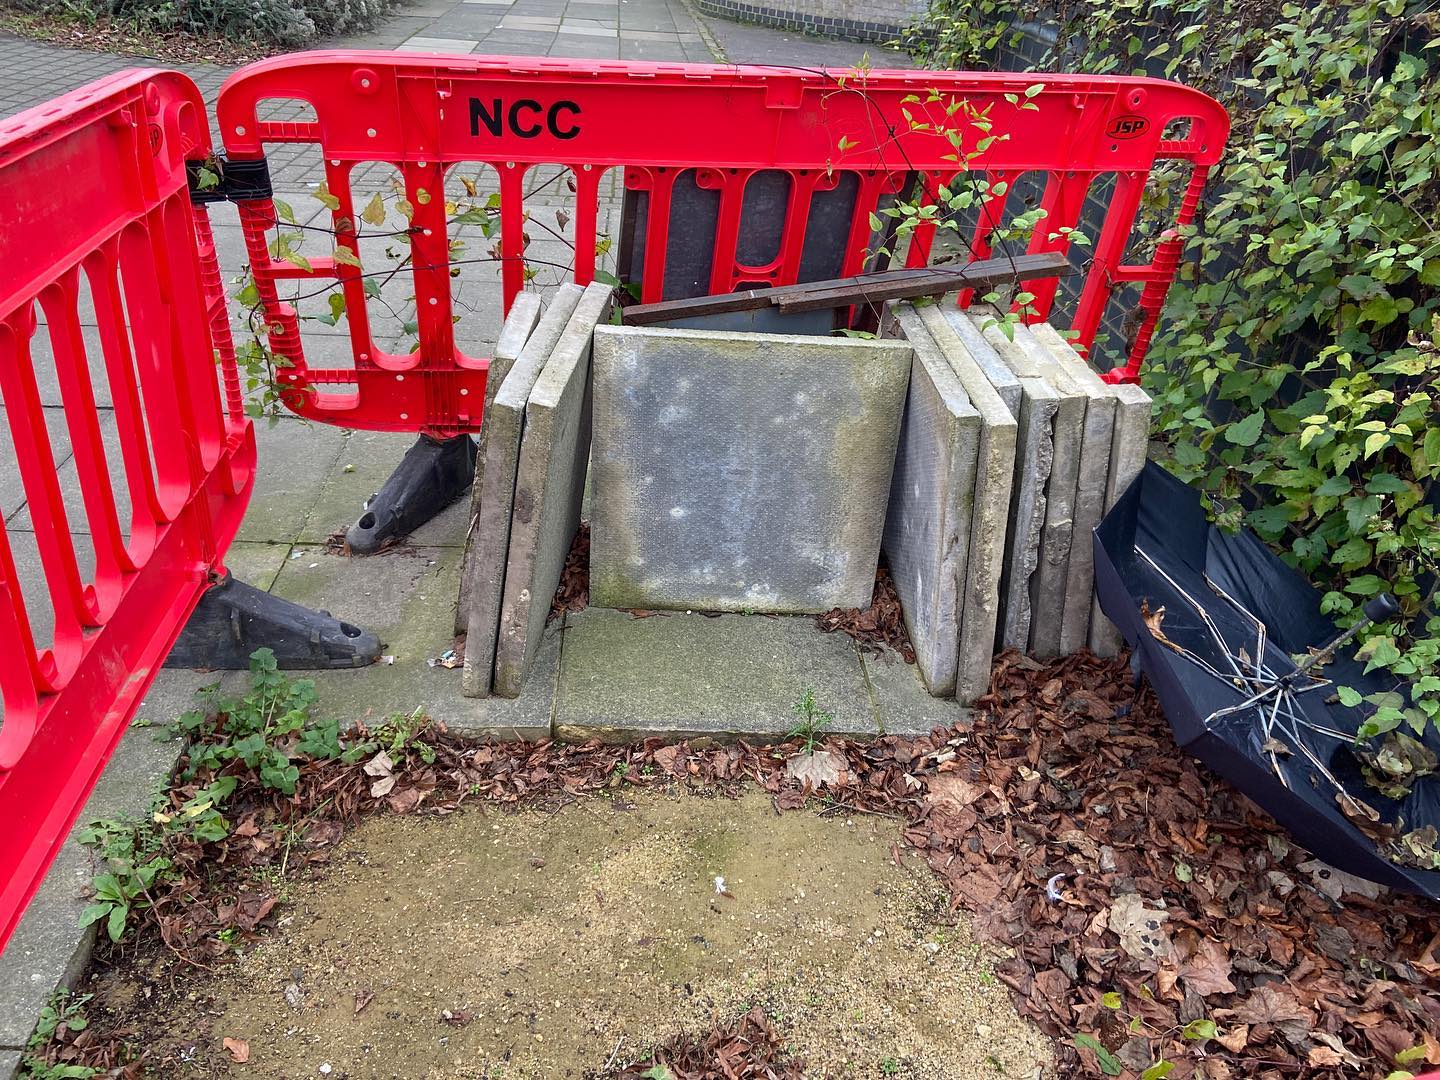 stacked paving slabs watch over the hole they covered, discarded umbrella like dead spider. red NCC barrier segregates